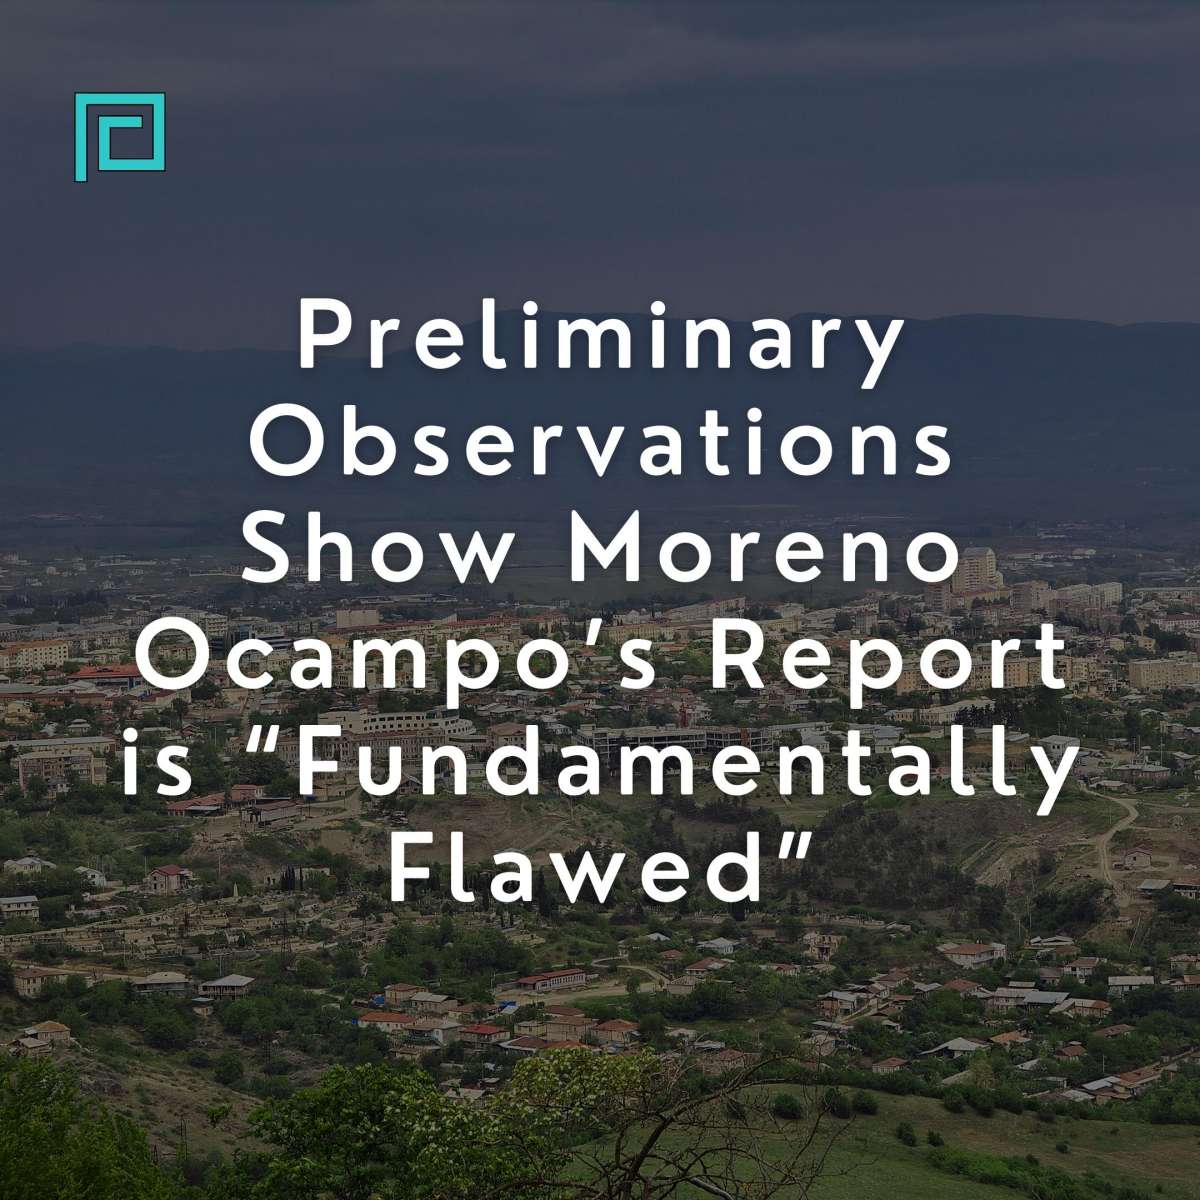 Preliminary Observations Show Moreno Ocampo’s Report is “Fundamentally Flawed”